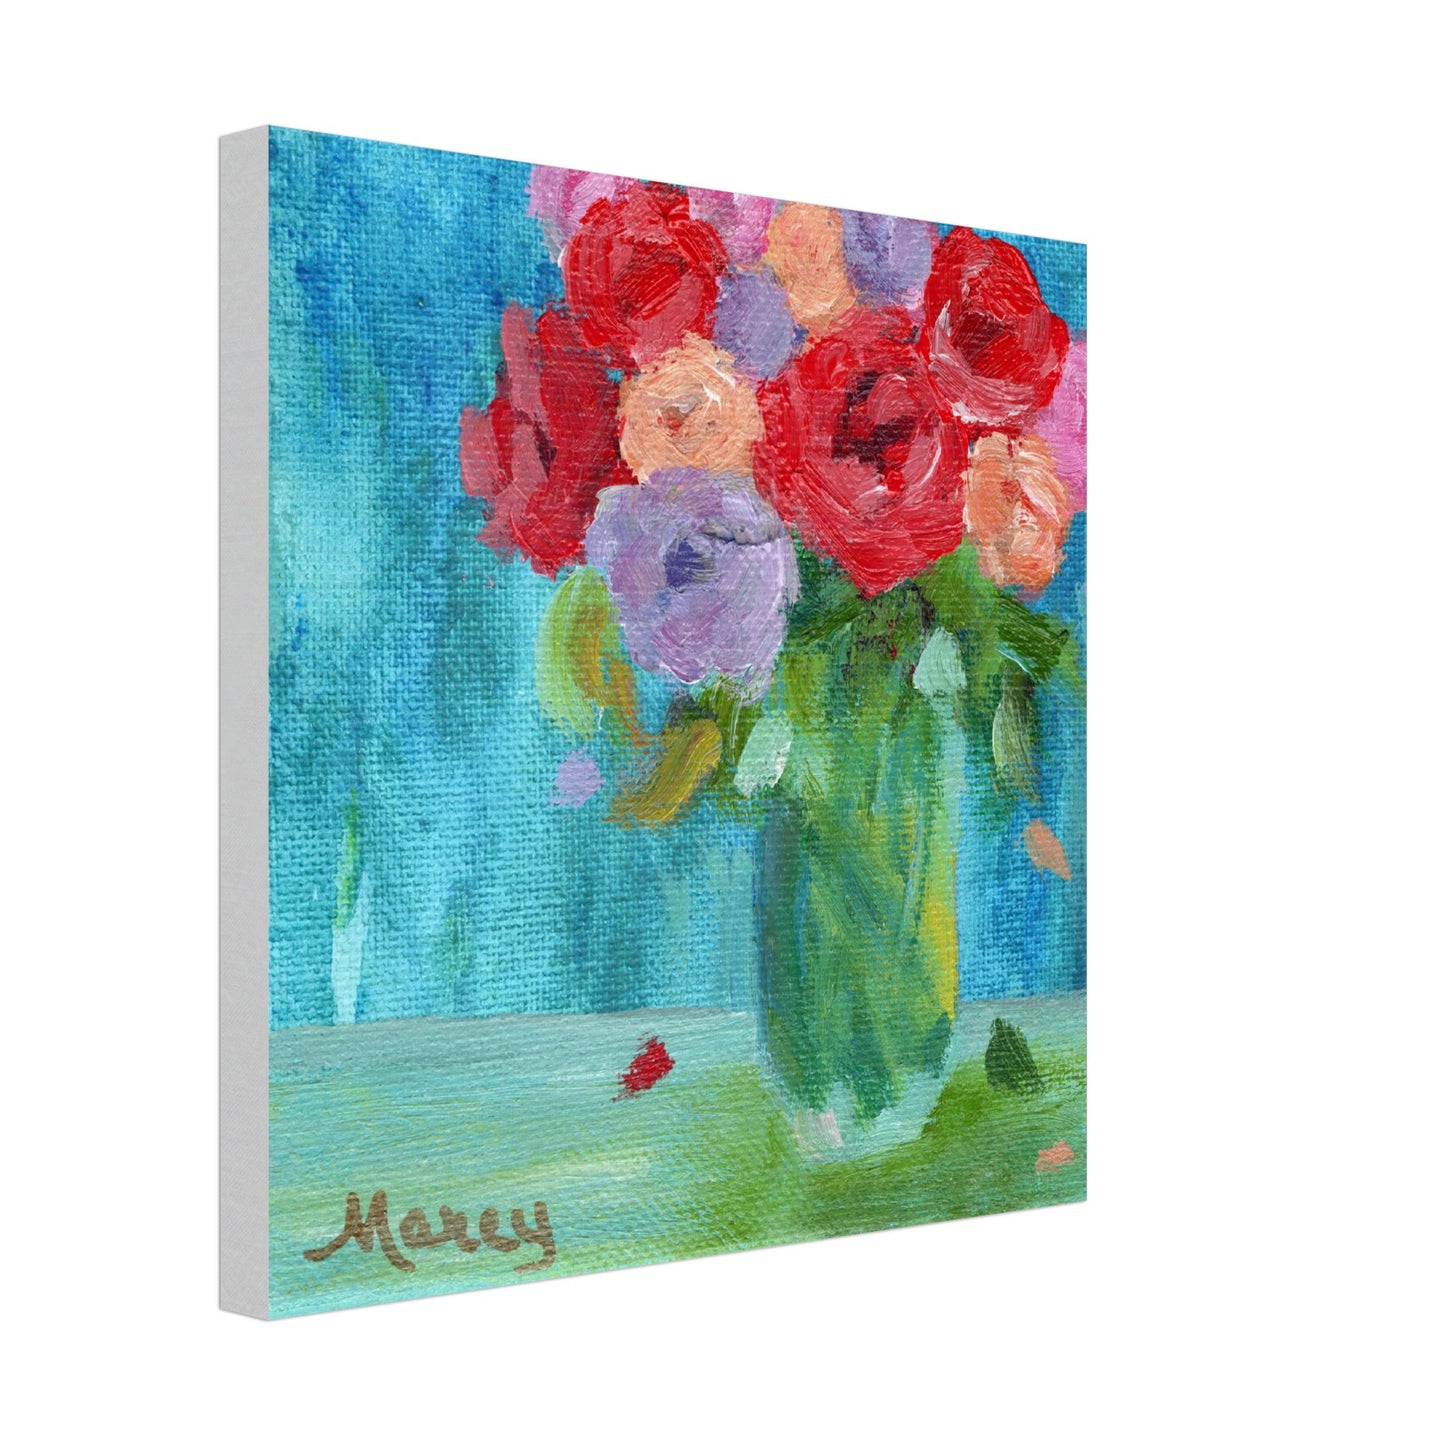 Impressionistic Fresh Roses in a Glass Vase in Cool Colors on Stretched Canvas